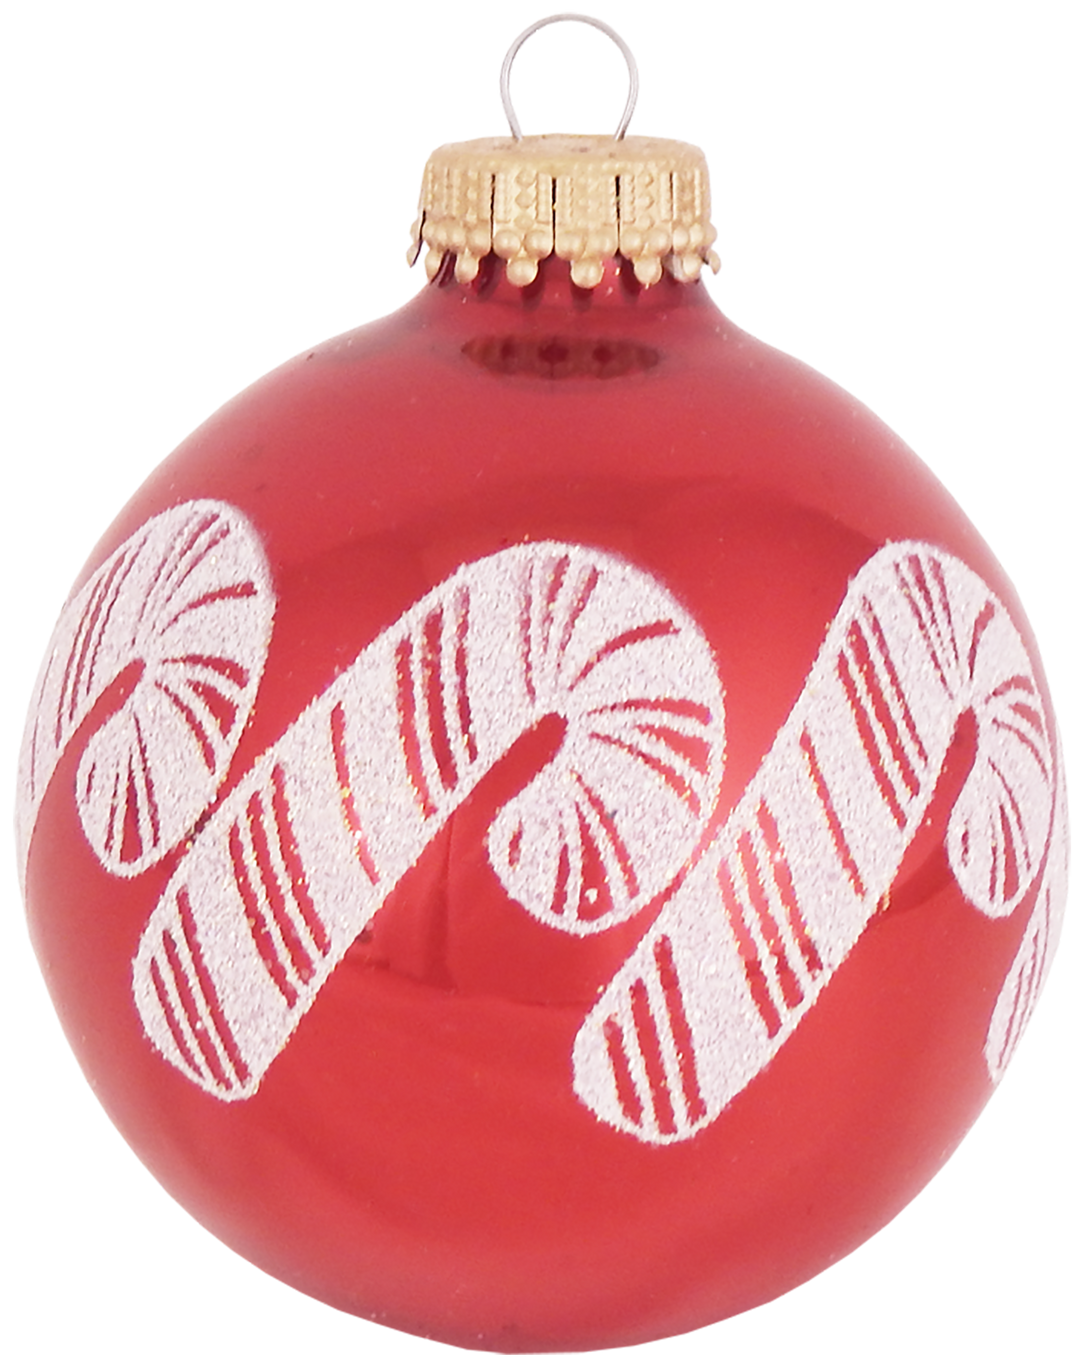 2 5/8" (67mm) Glass Ball Ornaments, Candy Apple Red / Flame Red with Standing Candy Canes, 4/Box, 12/Case, 48 Pieces